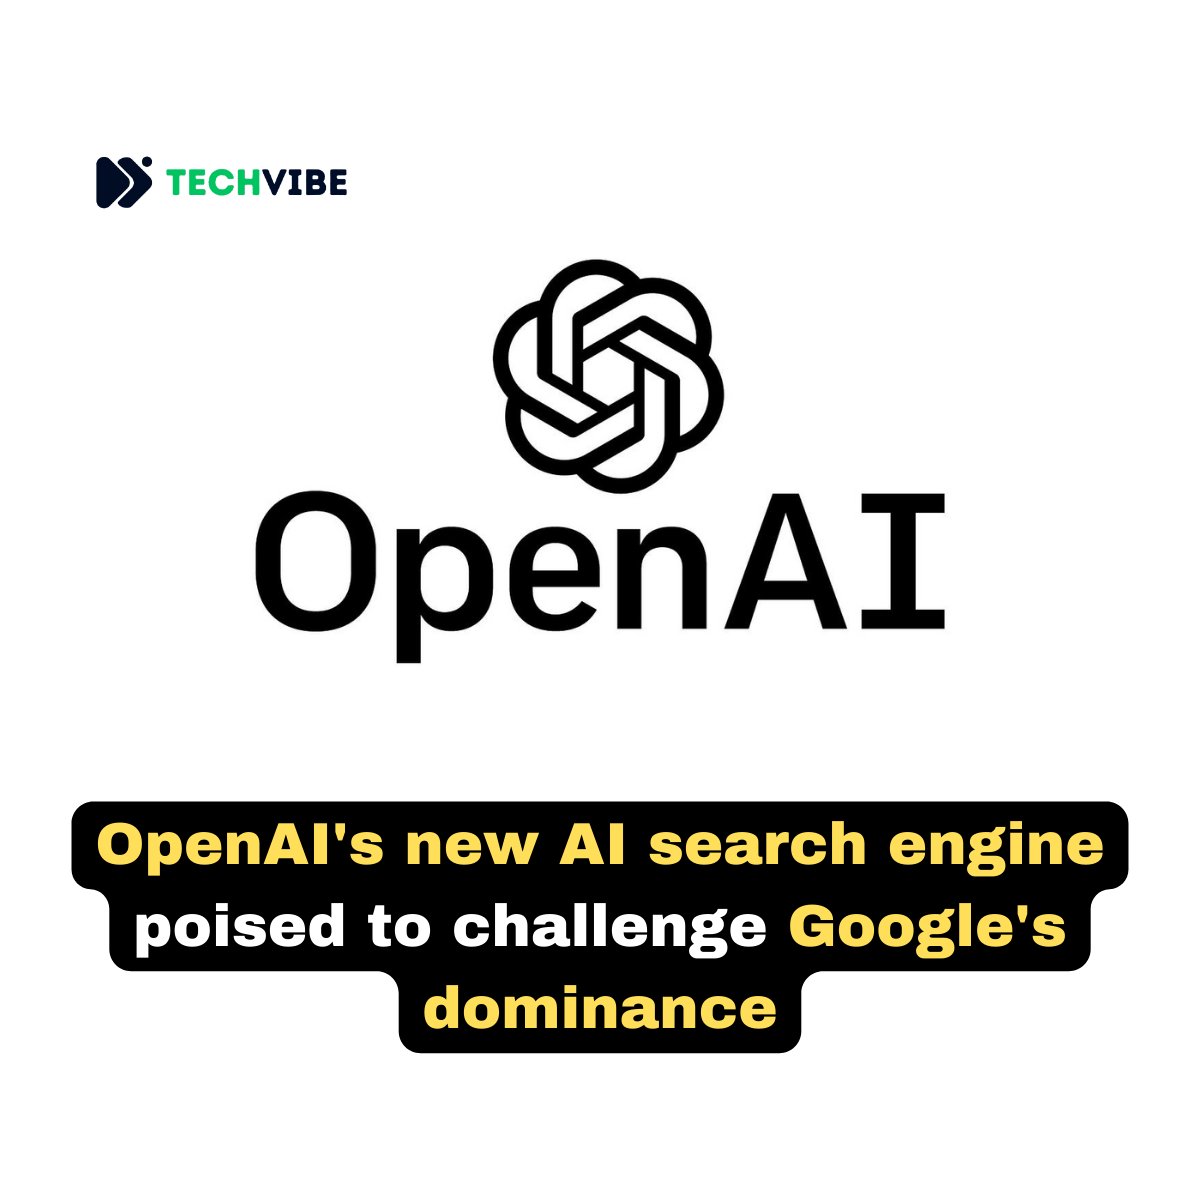 OpenAI's upcoming AI search engine, arriving before Google's I/O conference, promises to revolutionize search with real-time insights, potentially challenging Google's dominance. more: t.ly/SXf9O #AI #OpenAI #Searchengine #AInews